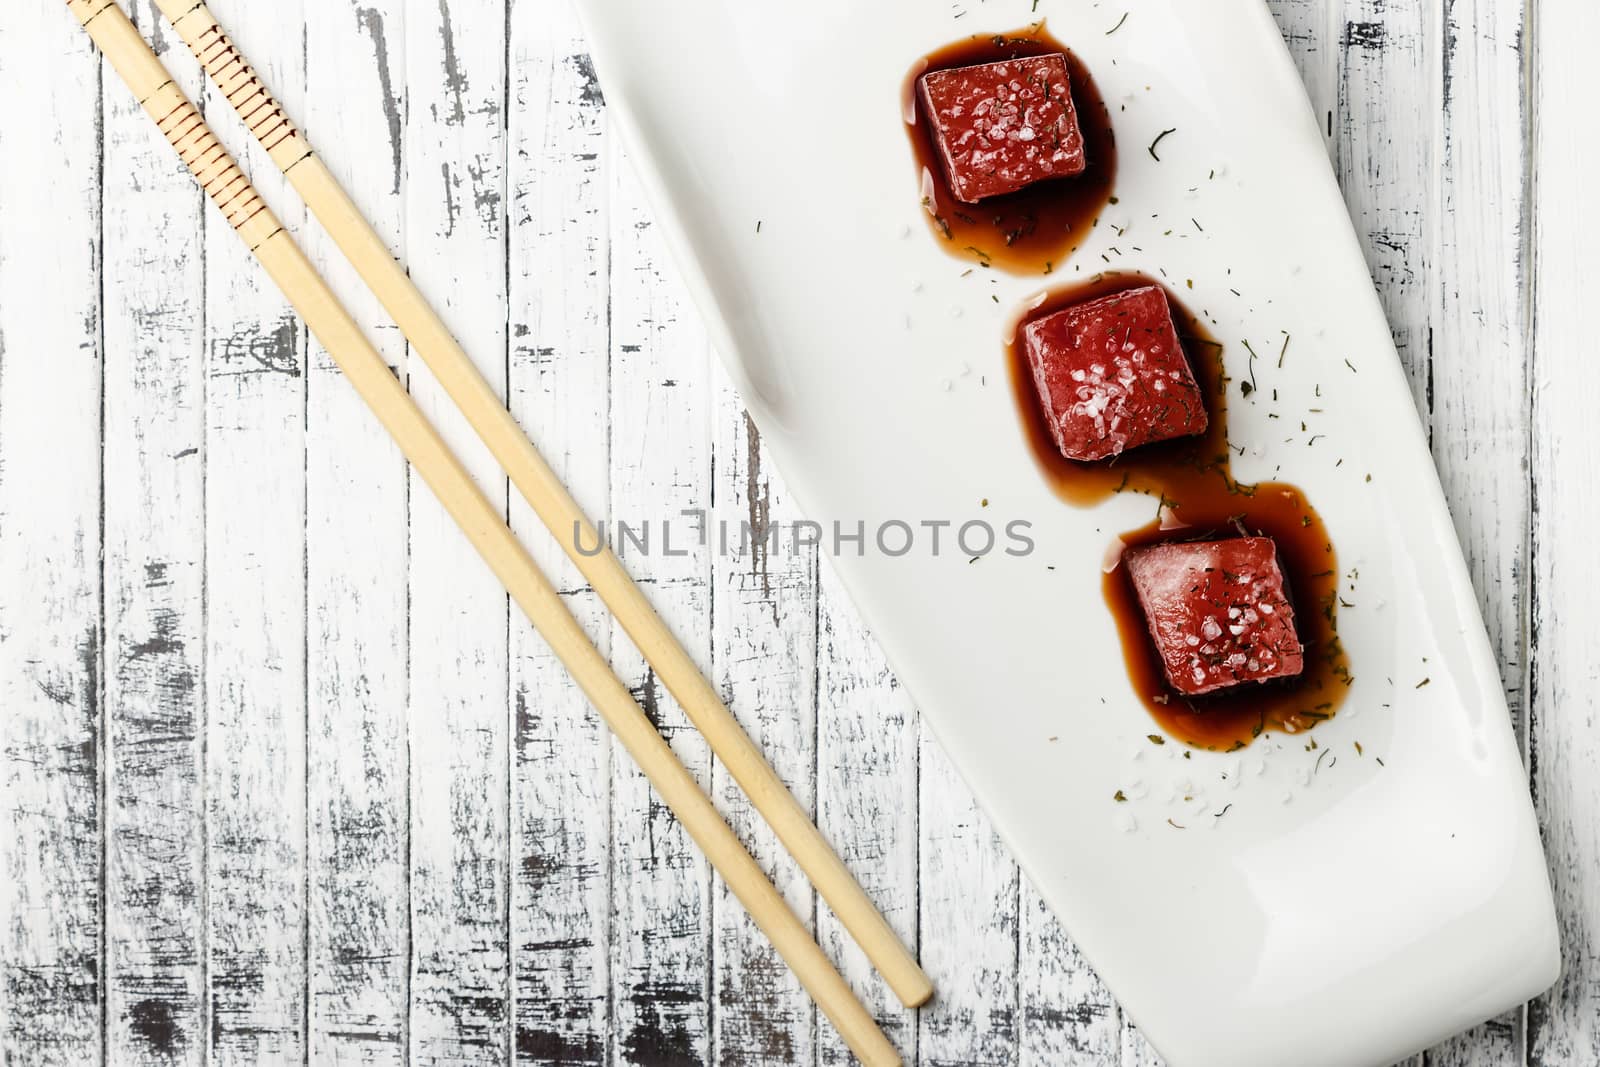 Tuna sashimi dipped in soy sauce,  thick salt and dill on old white wooden board with chopsticks. Viewed from above. Raw fish in traditional Japanese style. Horizontal image.